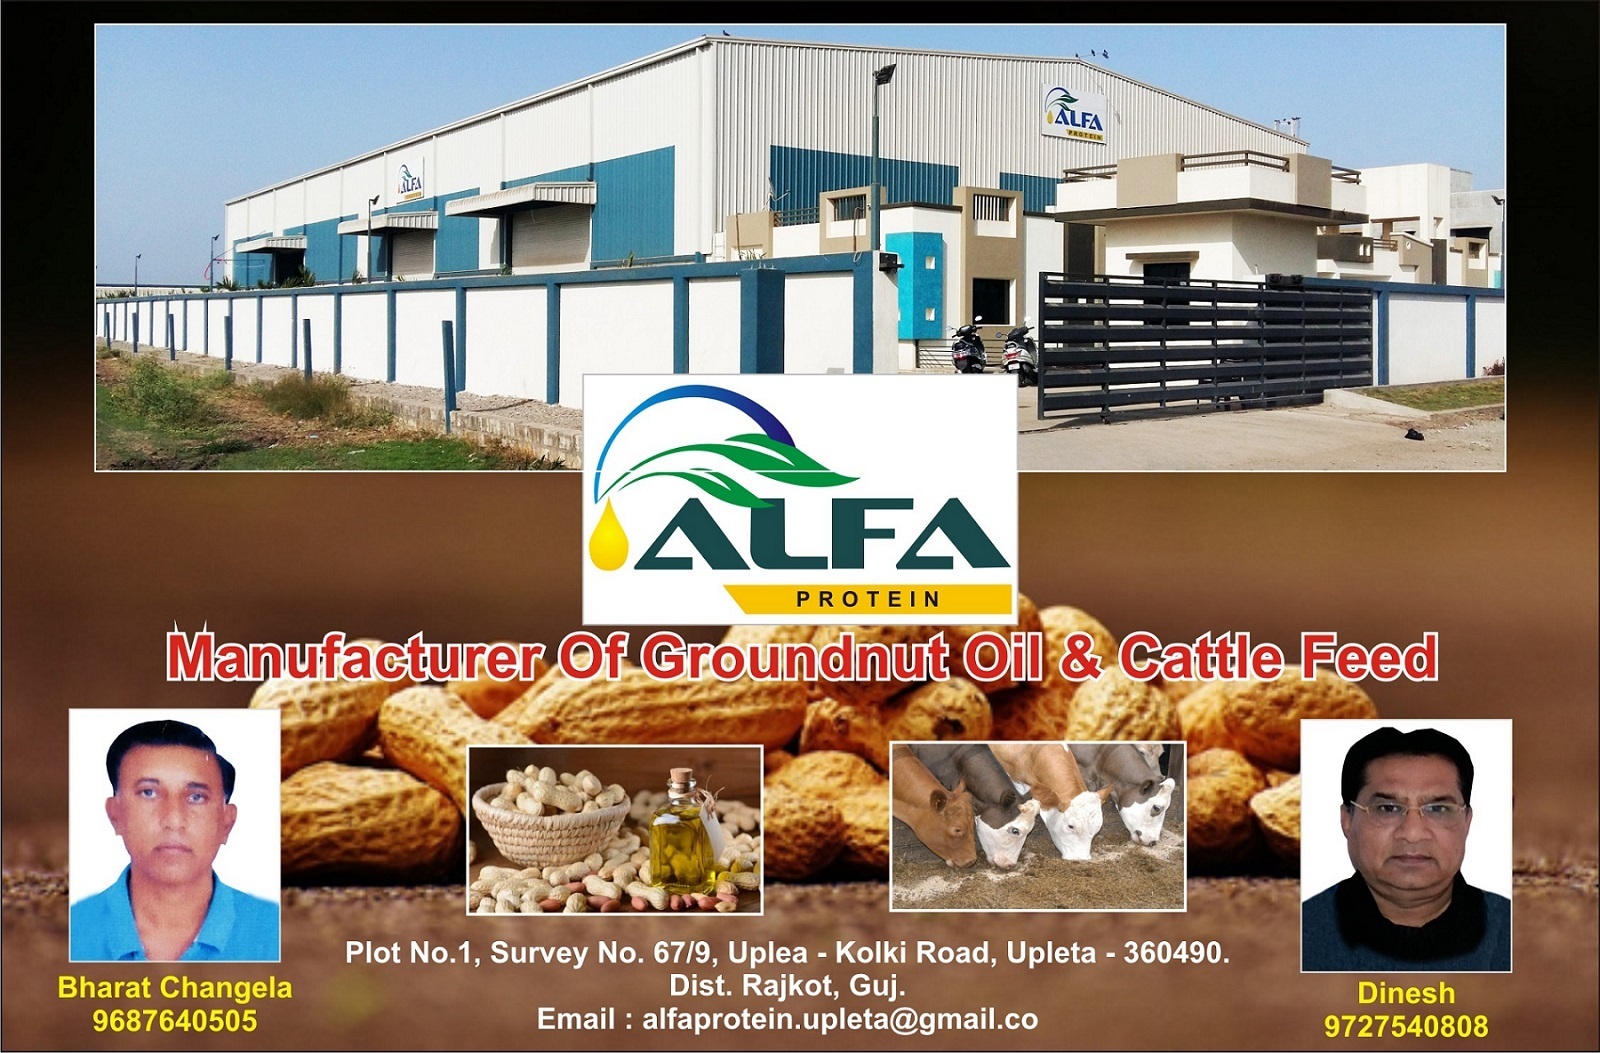 Alfa Protein - Manufacturer Of Groundnut Oil And Cattle Feed